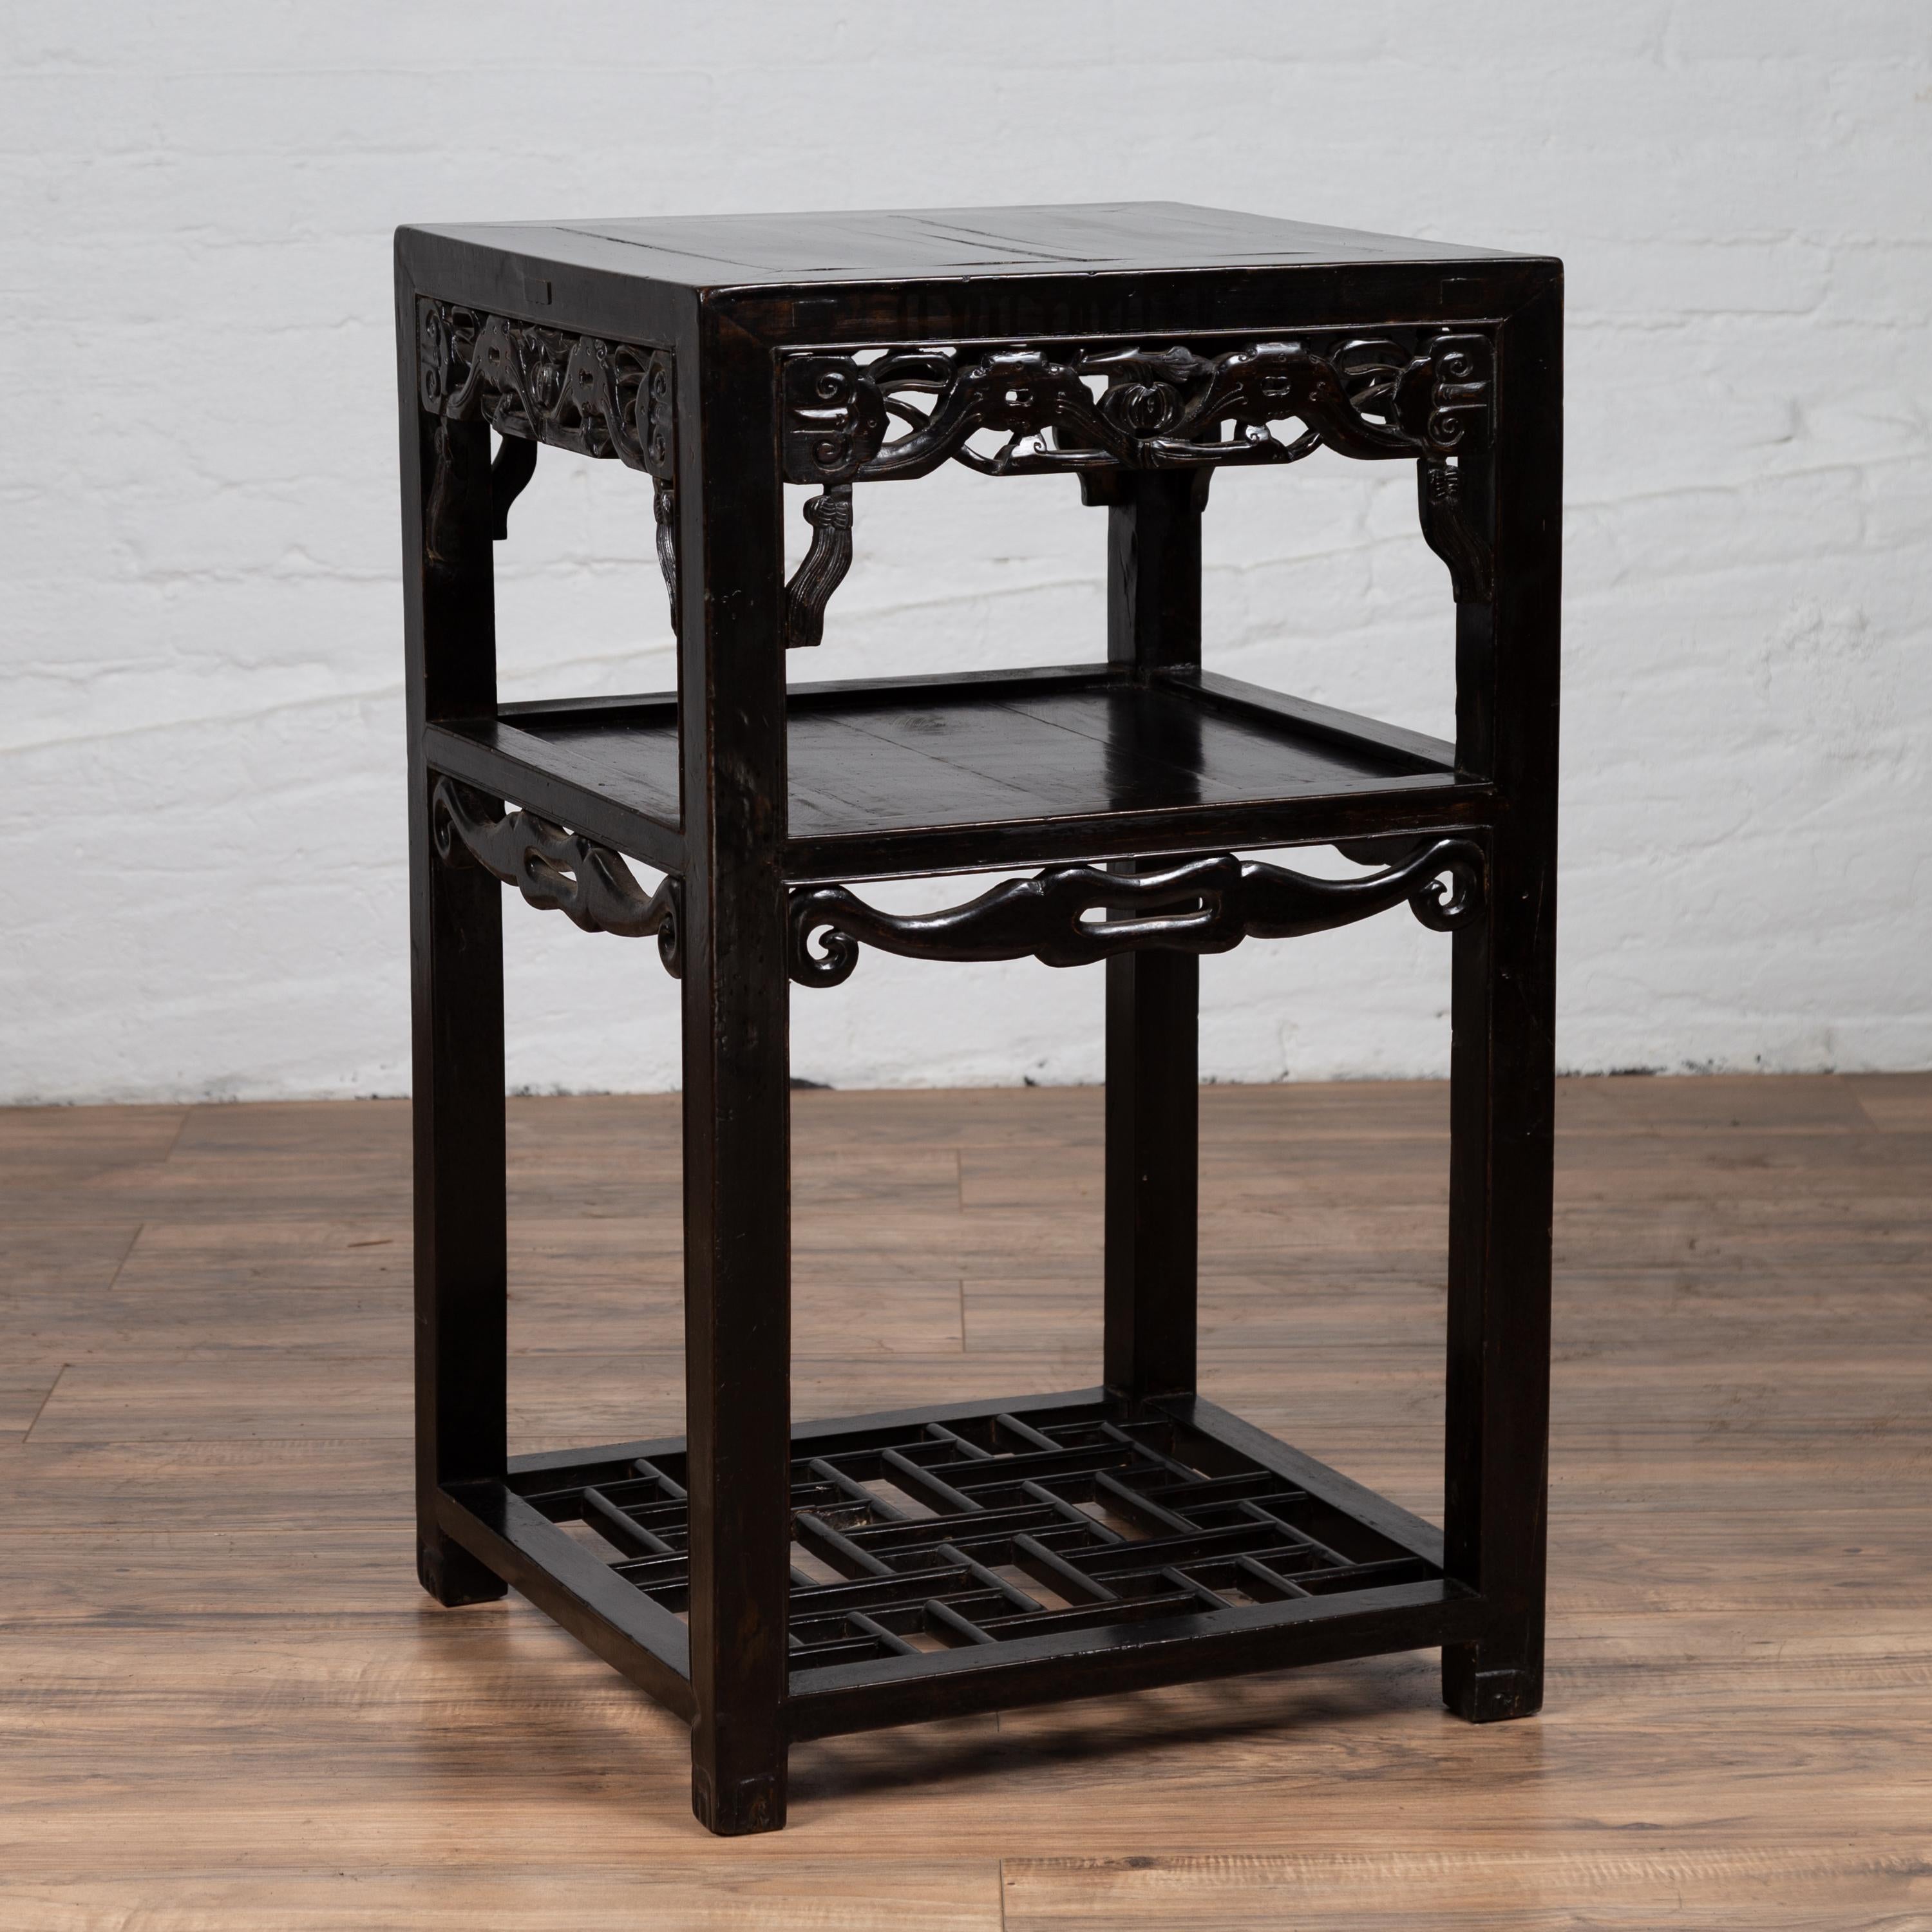 Antique Chinese Lamp Table with Dark Patina, Pierced Apron and Geometric Design 6